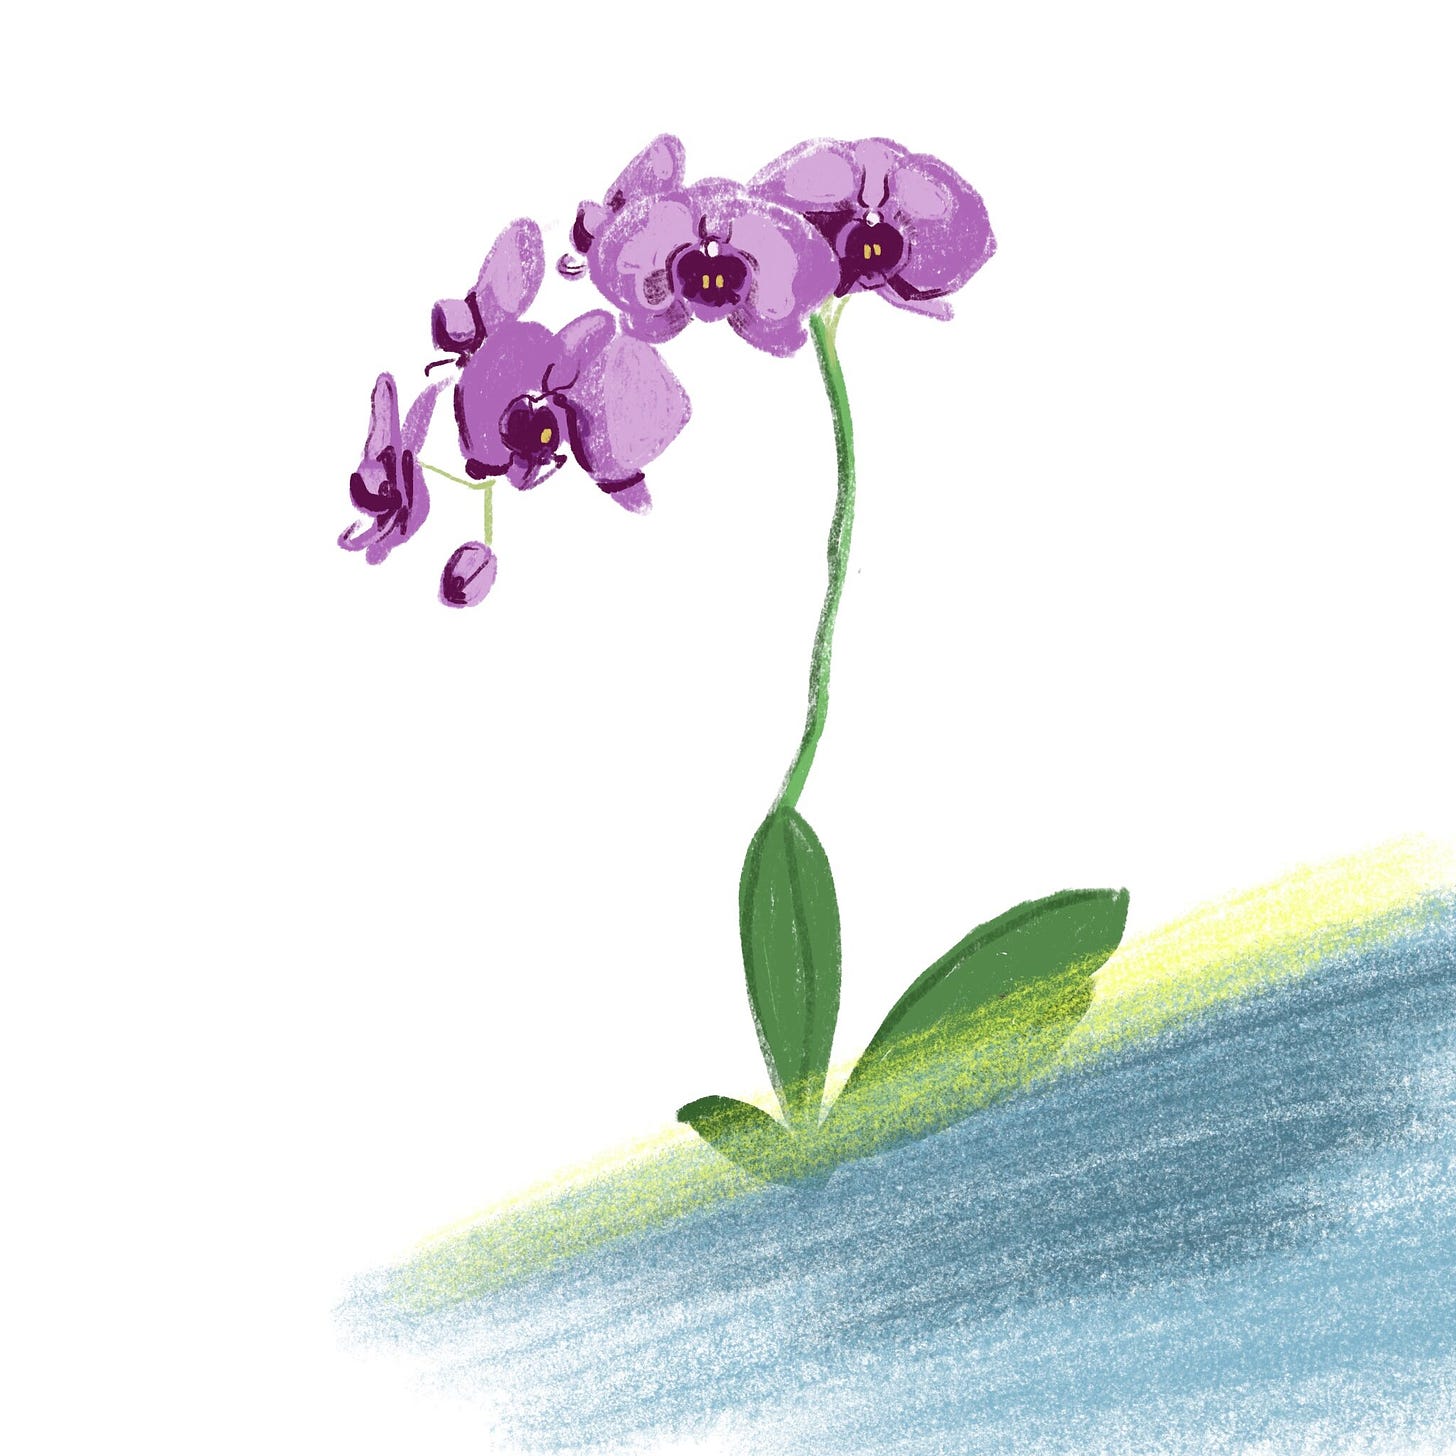 Orchid drawing is hard!